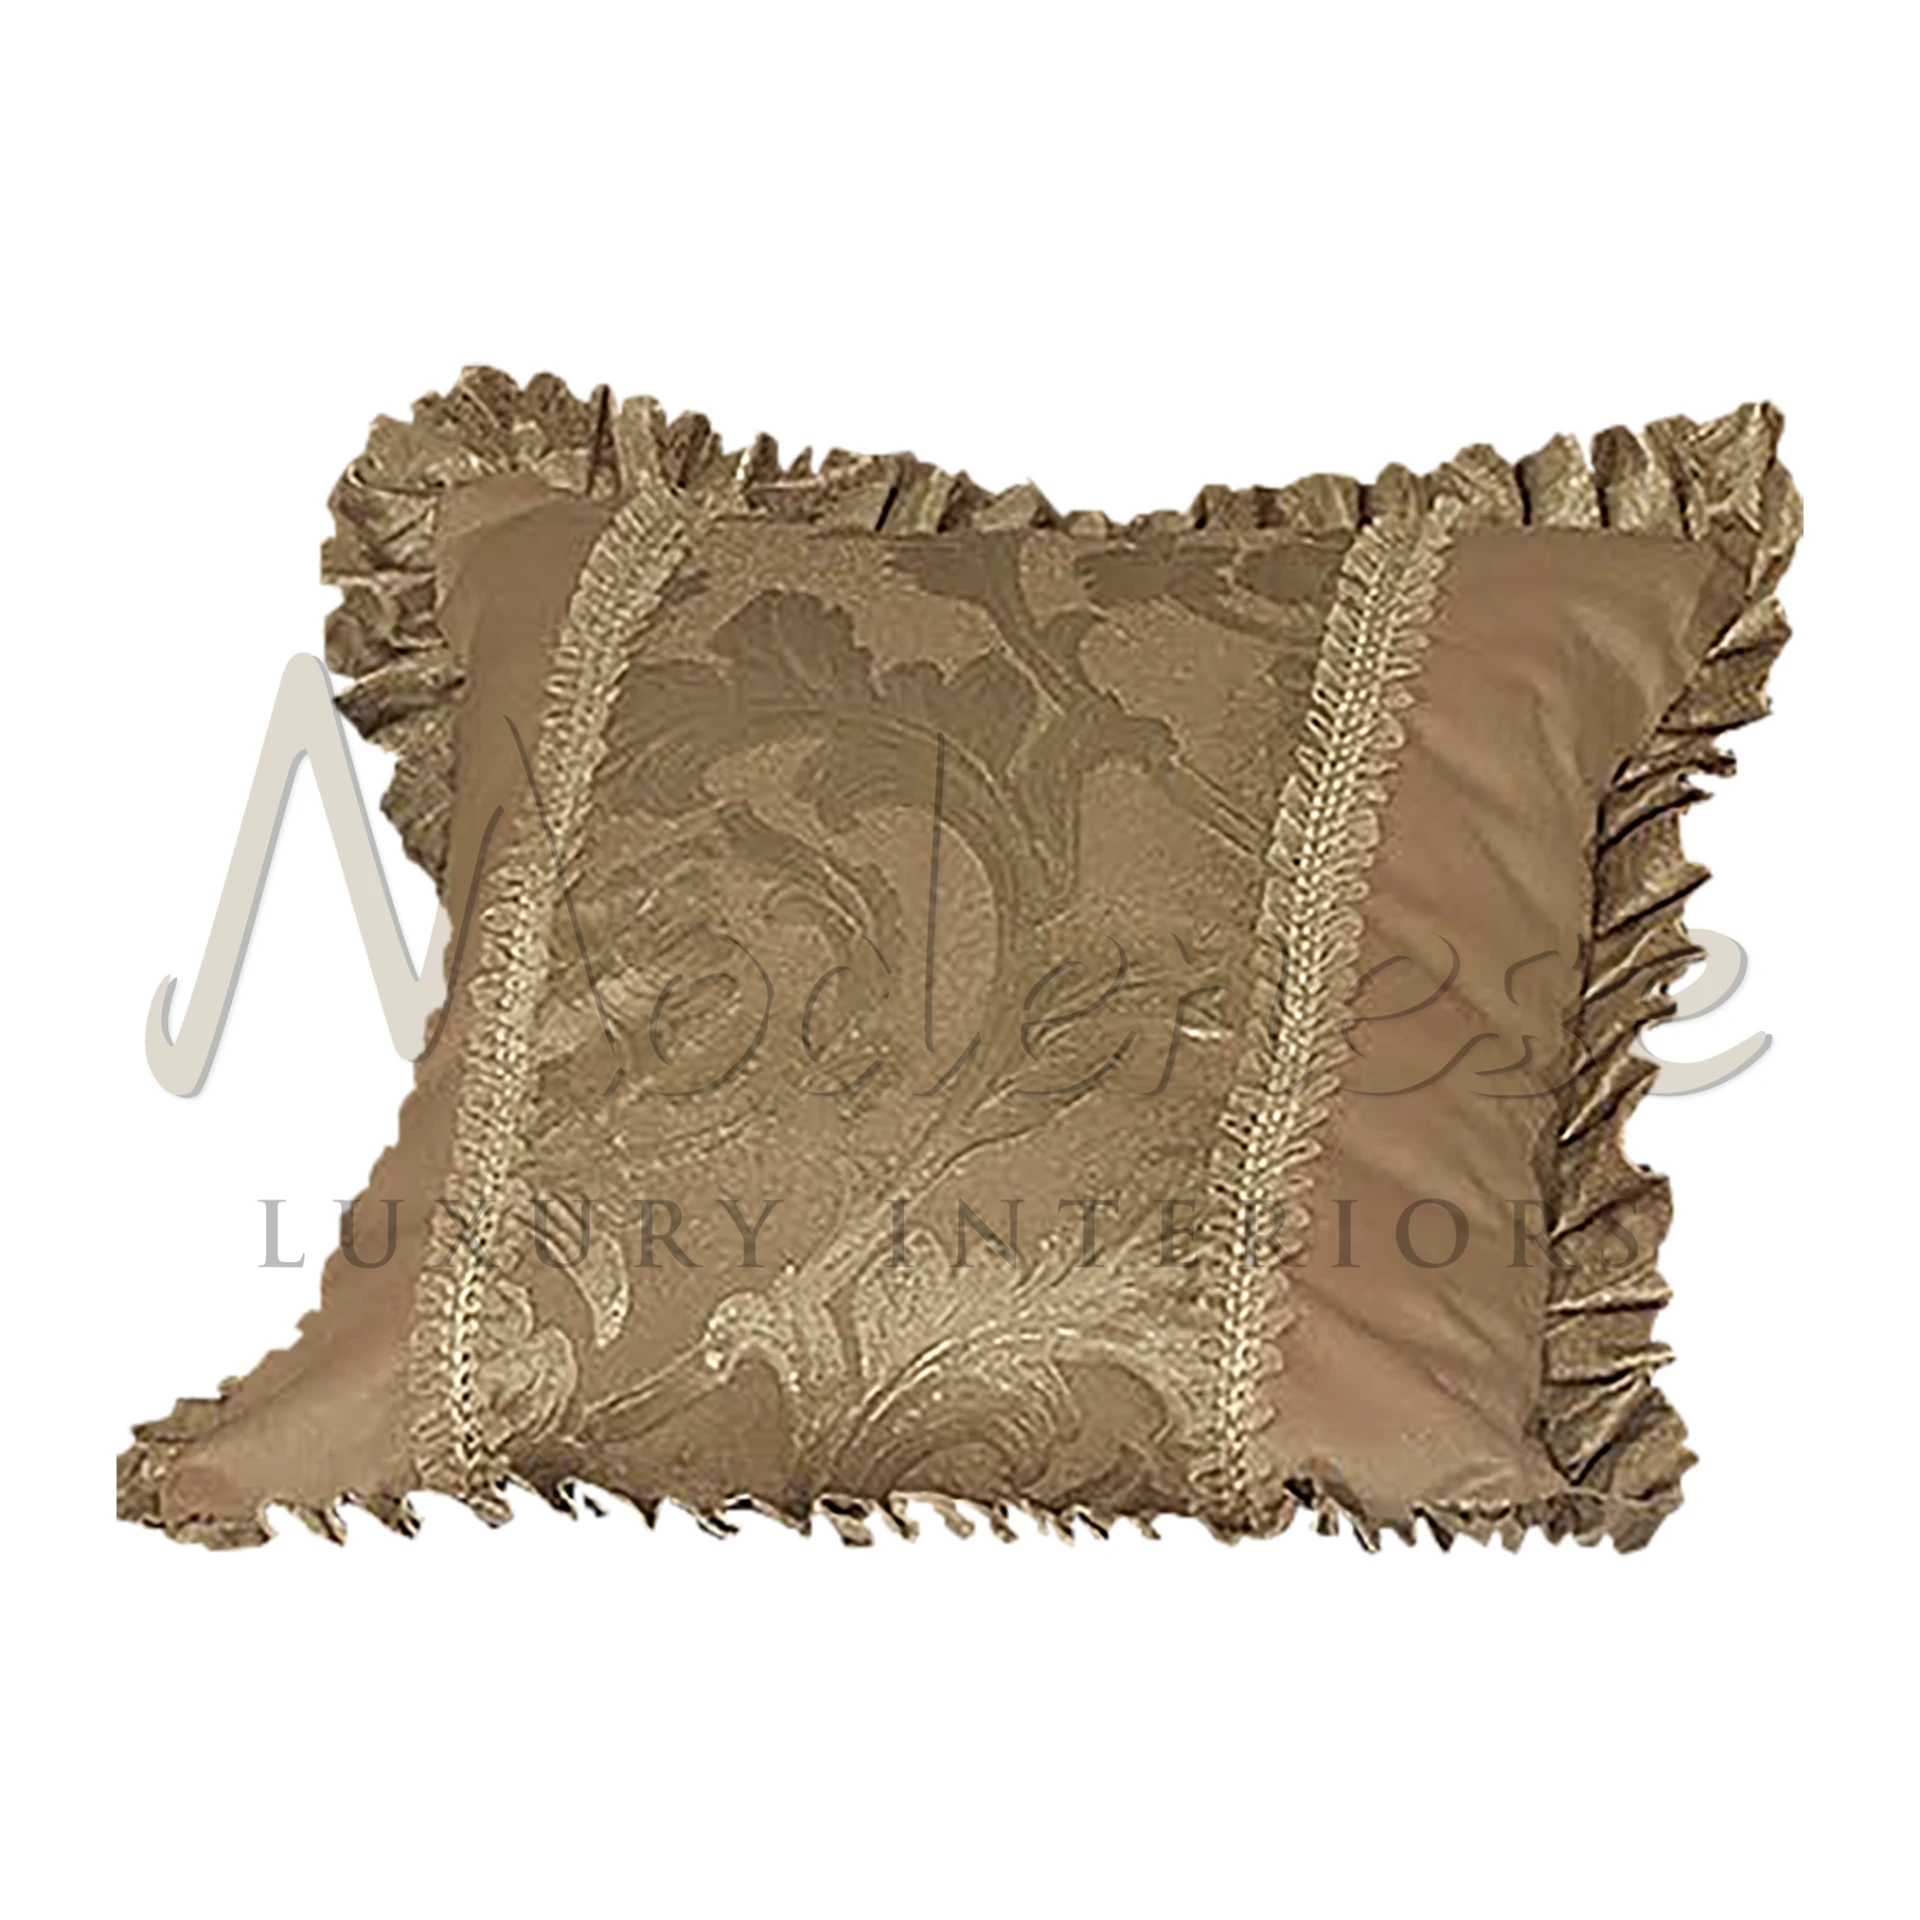 Stunning Designer Pillow displaying intricate patterns and rich textures, a testament to luxurious elegance and sophisticated design.